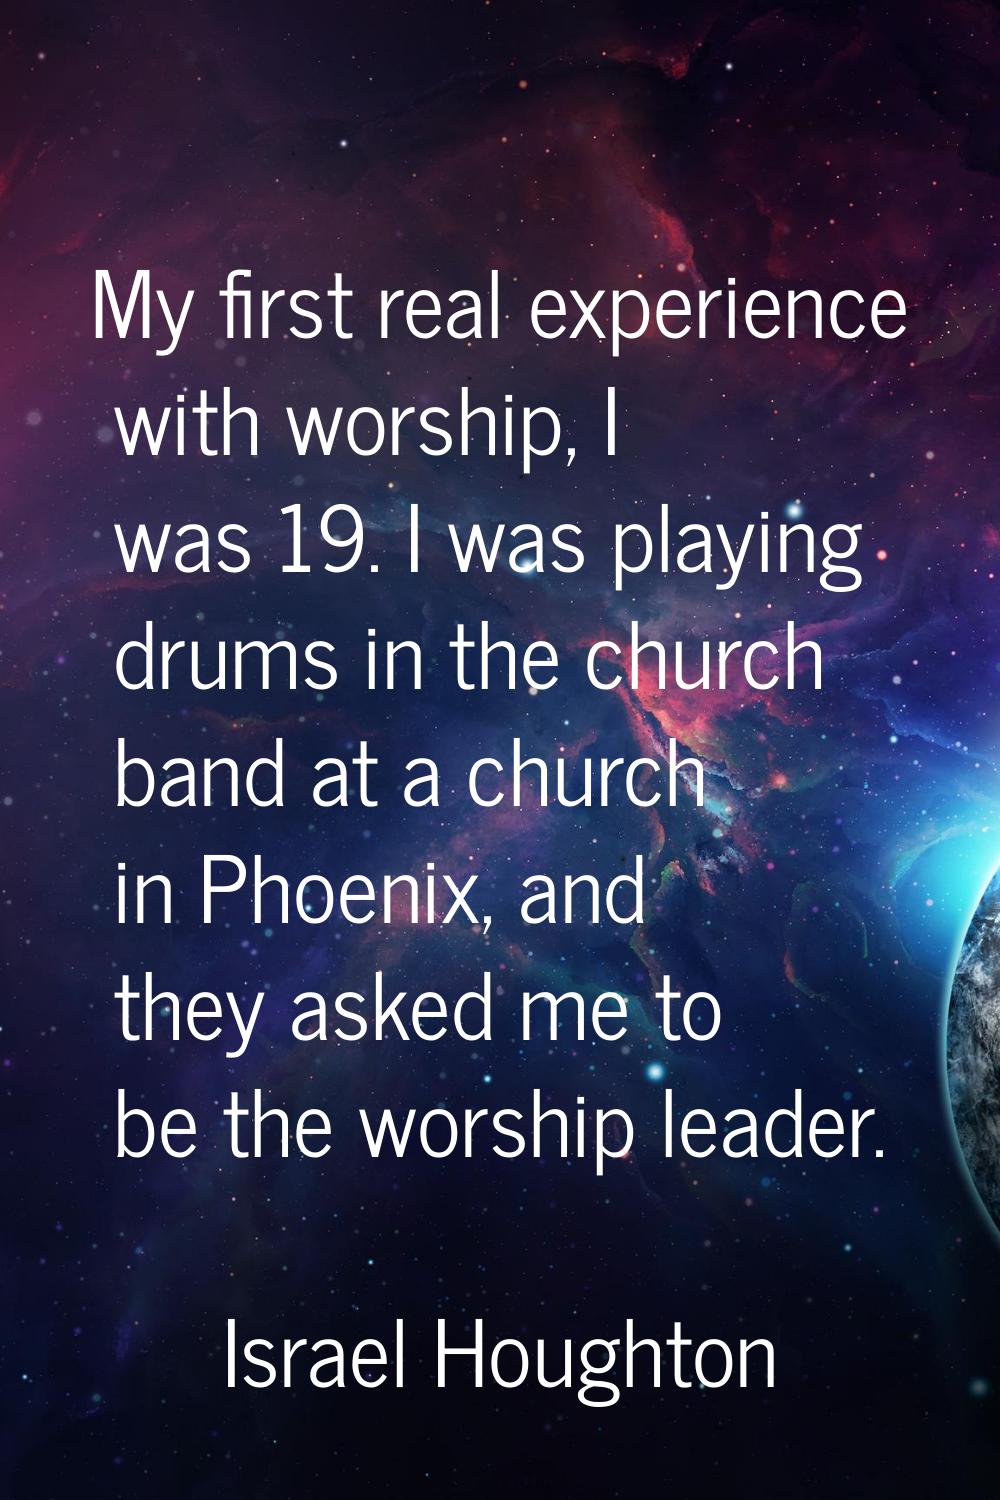 My first real experience with worship, I was 19. I was playing drums in the church band at a church